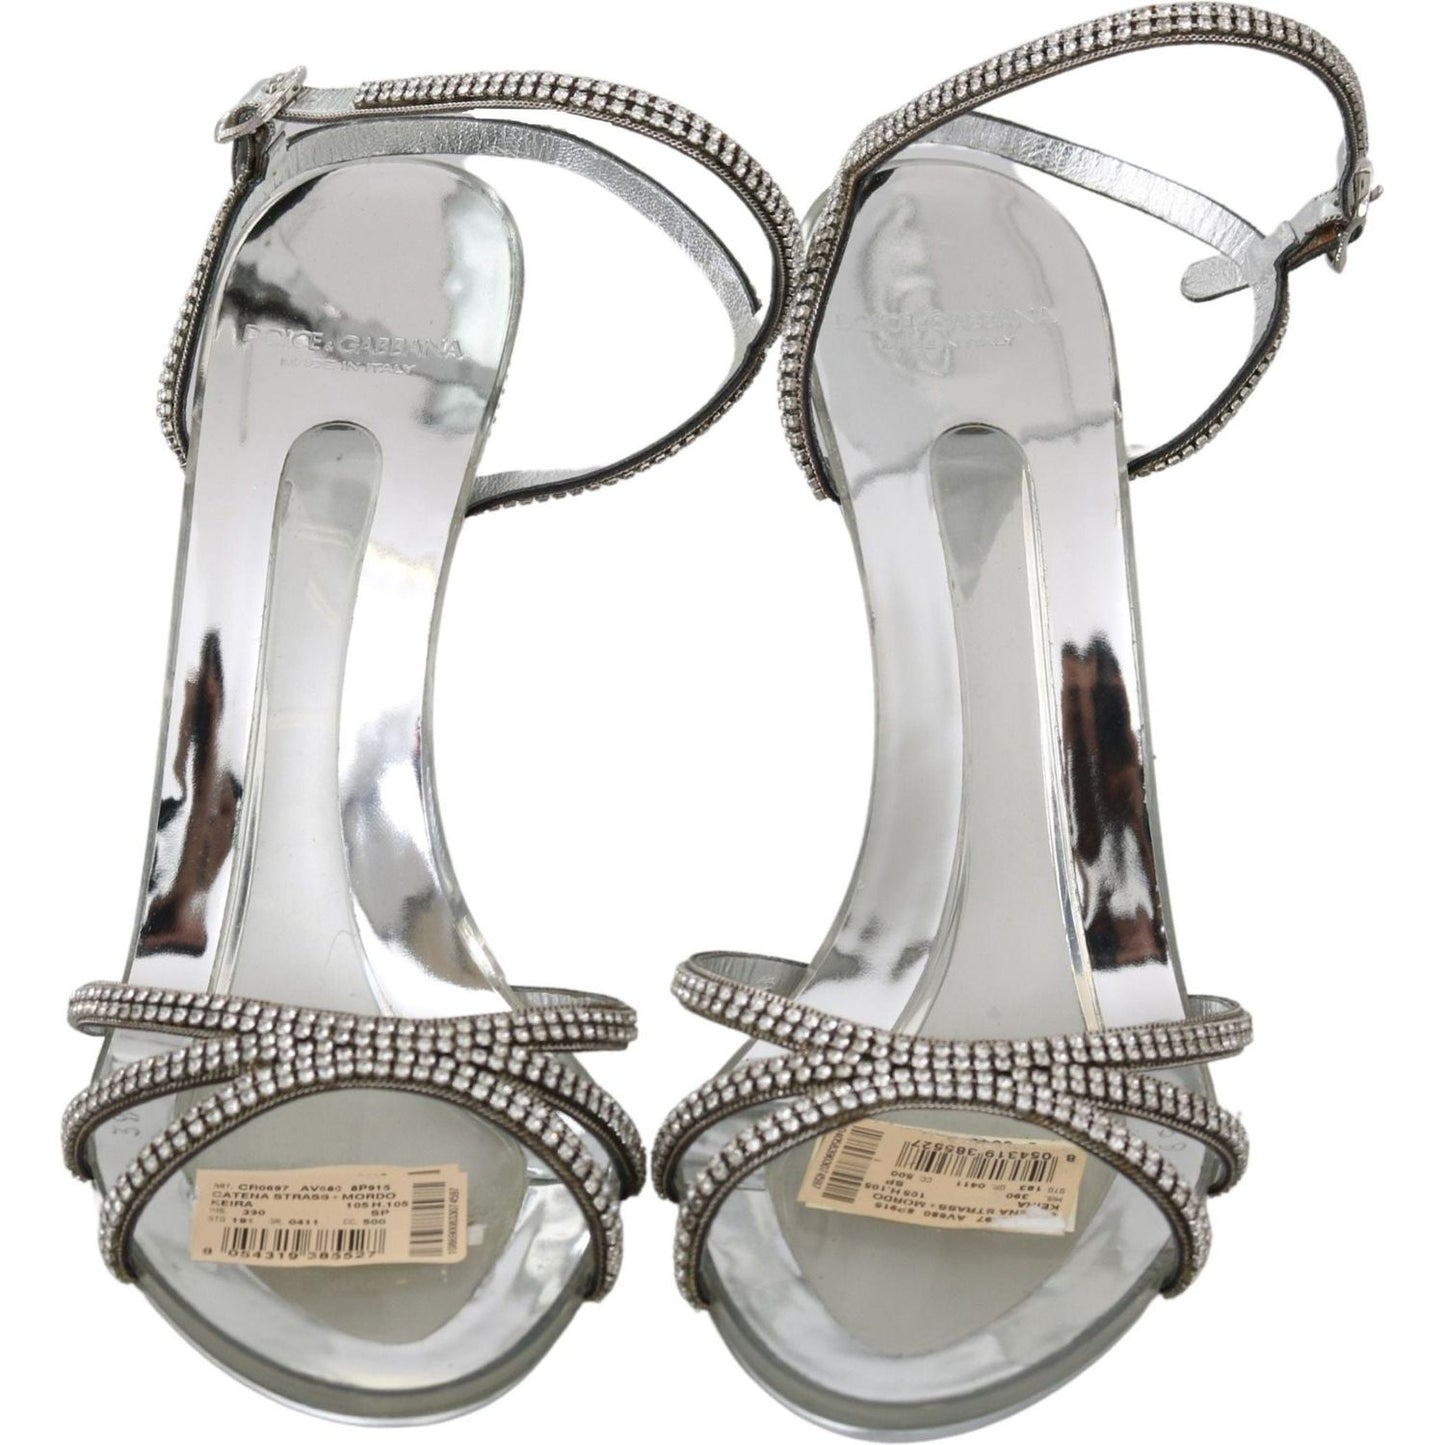 Dolce & Gabbana Silver Leather Ankle Strap Sandals with Crystals silver-crystal-ankle-strap-sandals-shoes